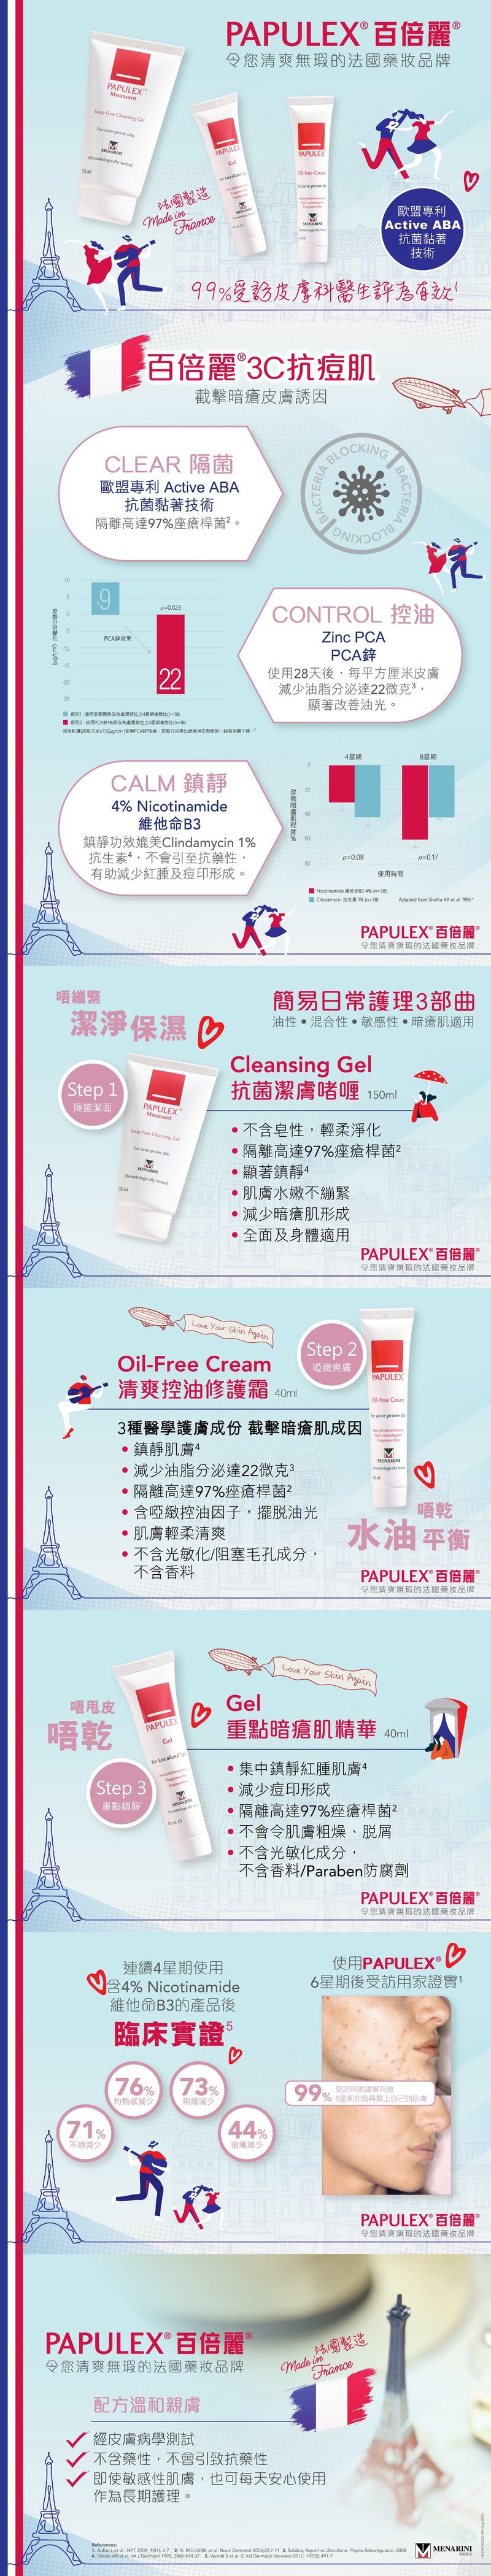 PAPULEX Soap Free Anti-Bacterial Cleansing Gel #Acne prone Skin #Oily Skin #Maskne #Acne Prone Face Wash Body Wash #Moisture Cleanser #Oil Control [HK Label Authentic Product]